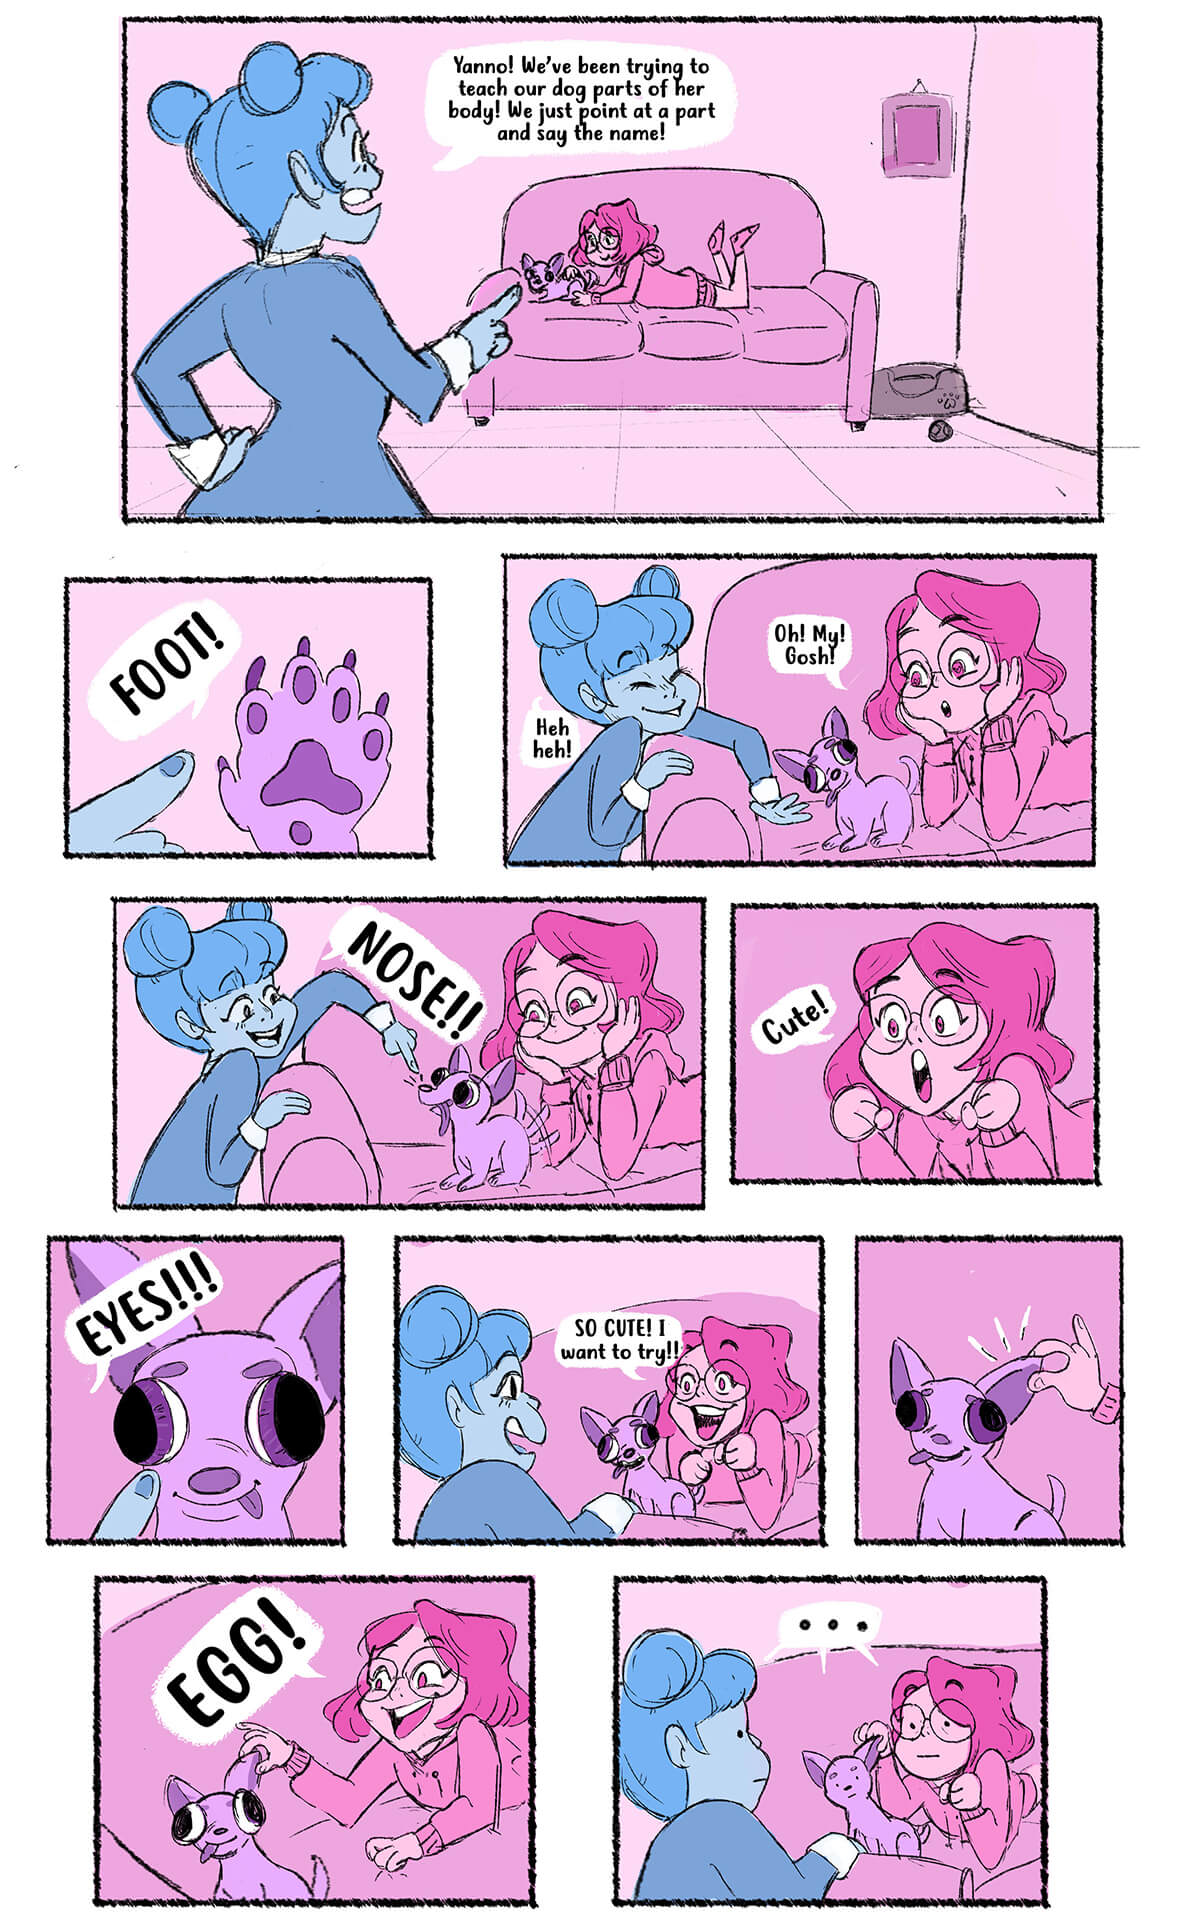 A pink and blue comics page with panels following two characters and a dog.